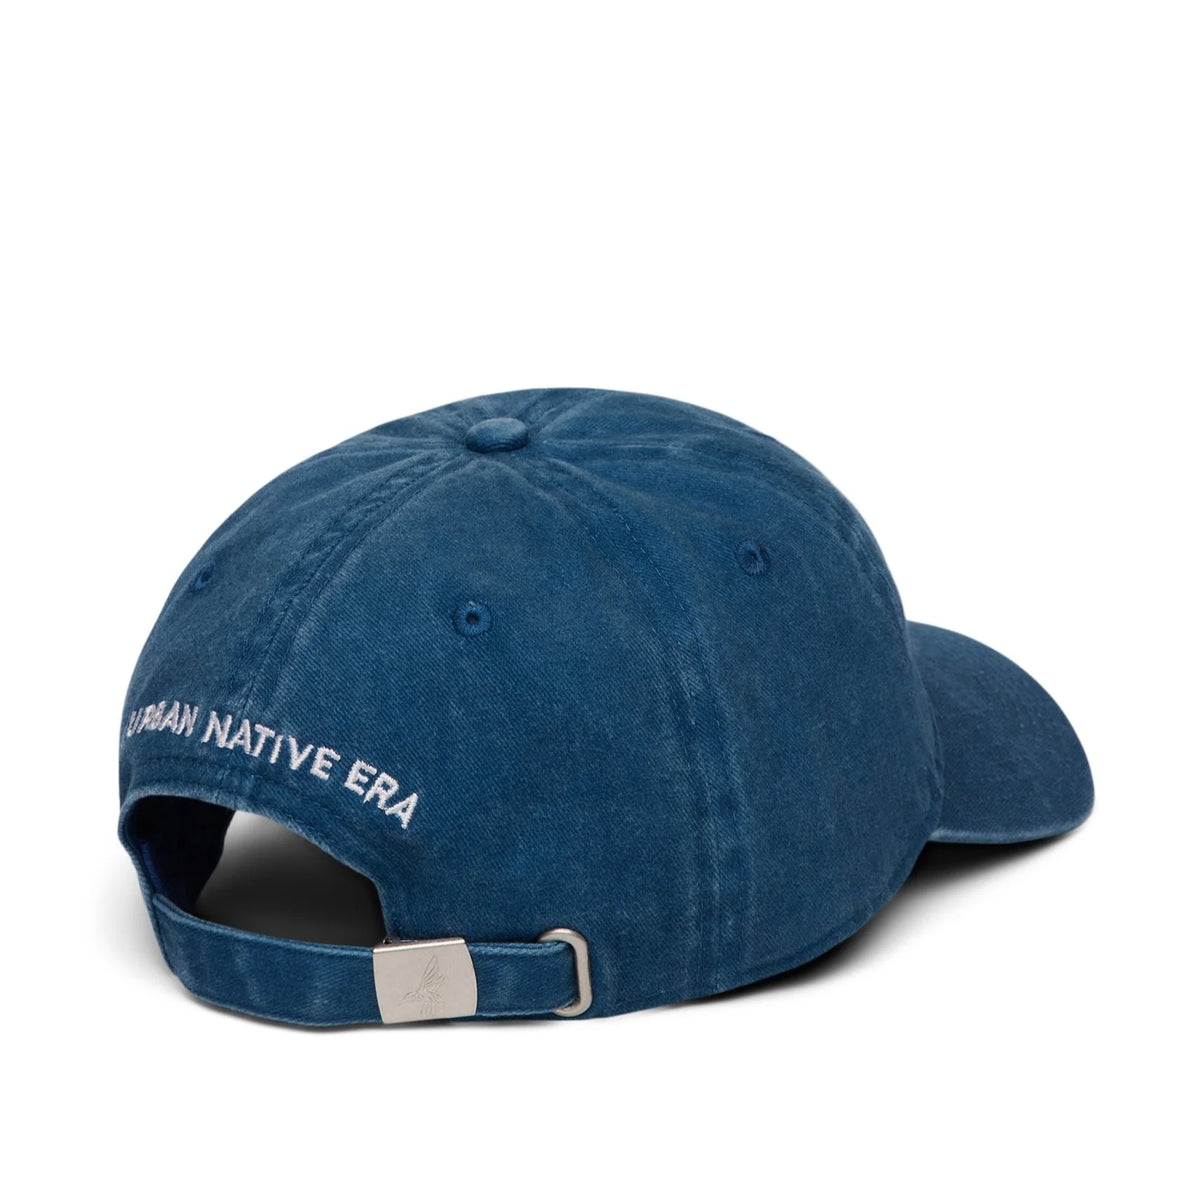 &quot;You Are On Native Land&quot; Blue Cap